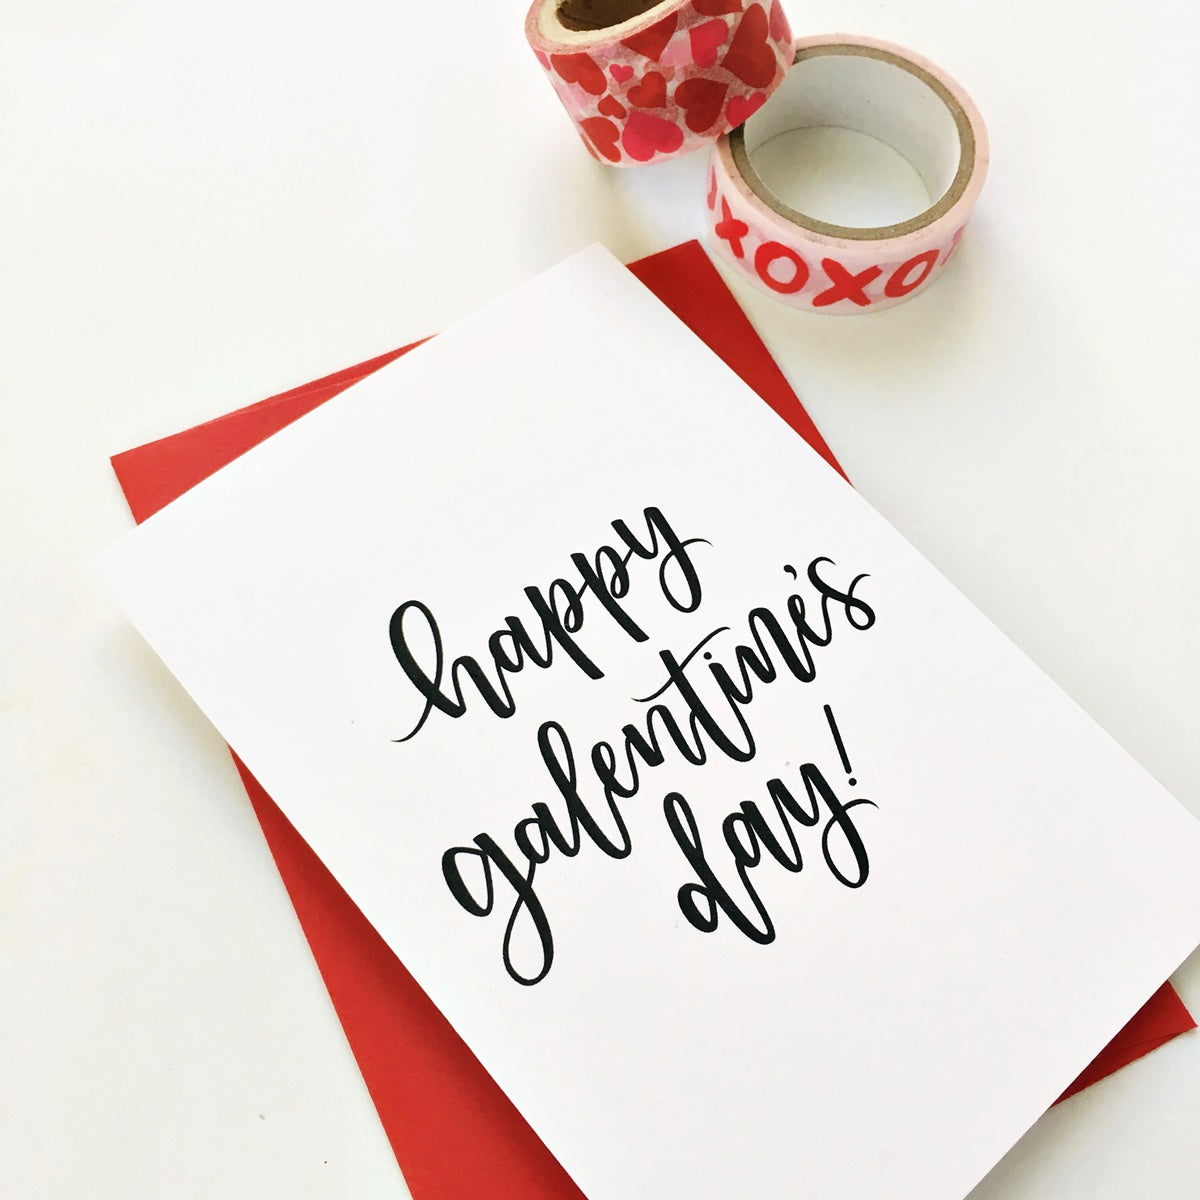 Happy Galentine's Day Calligraphy Card, Set of 6, A1 & A2 Sizes Available